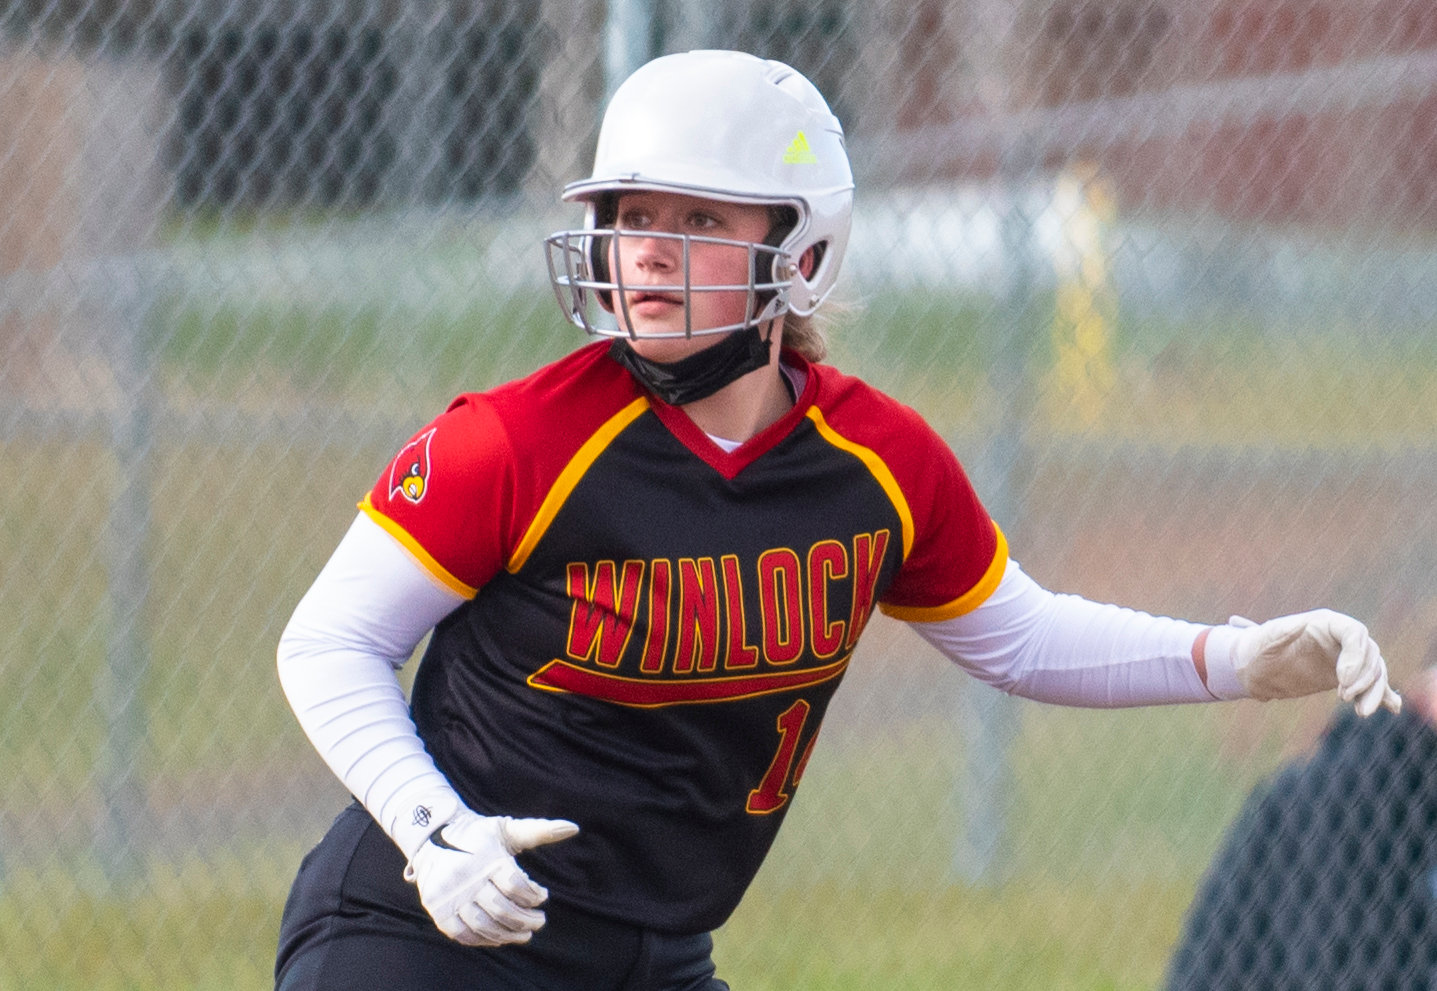 Winlock junior Addison Hall watches a play at the plate from the third base line on Thursday.